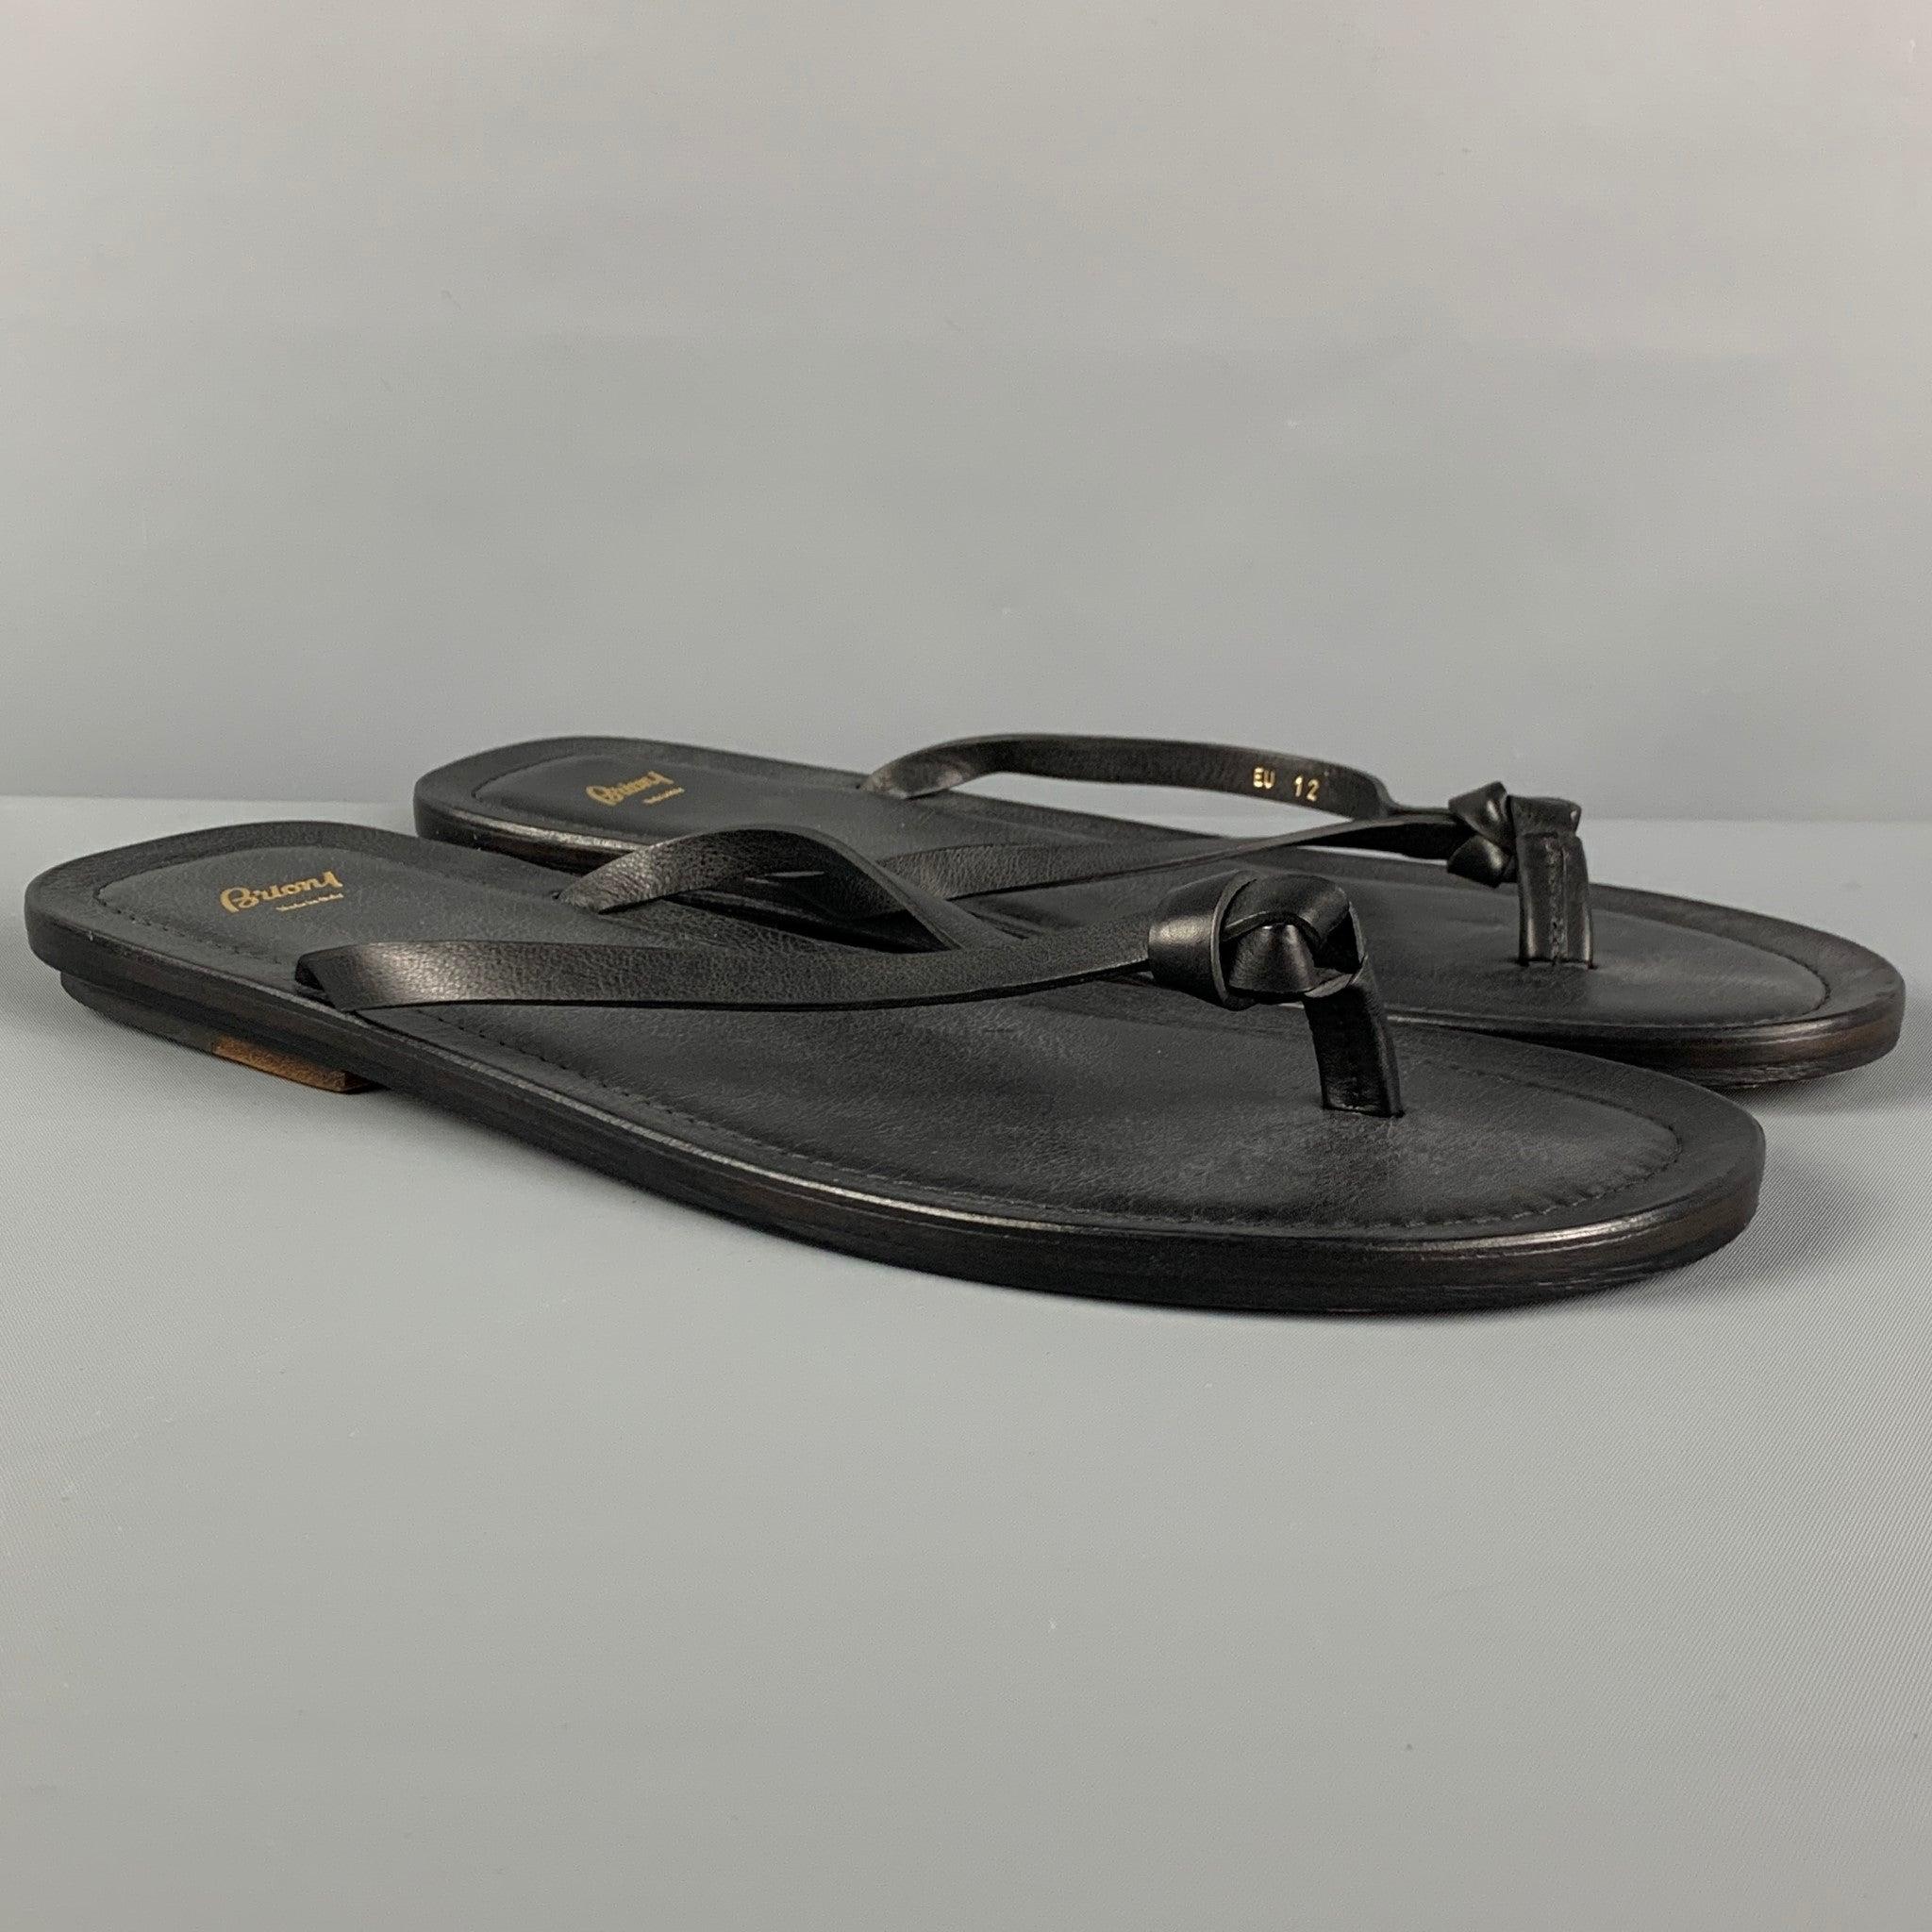 BRIONI sandals comes in a black leather featuring thong straps. Made in Italy.
New With Box.
 

Marked:   EU 12 / US 13Outsole: 12 inches  x 4.5 inches 
  
  
 
Reference: 117430
Category: Sandals
More Details
    
Brand:  BRIONI
Size:  13
Color: 